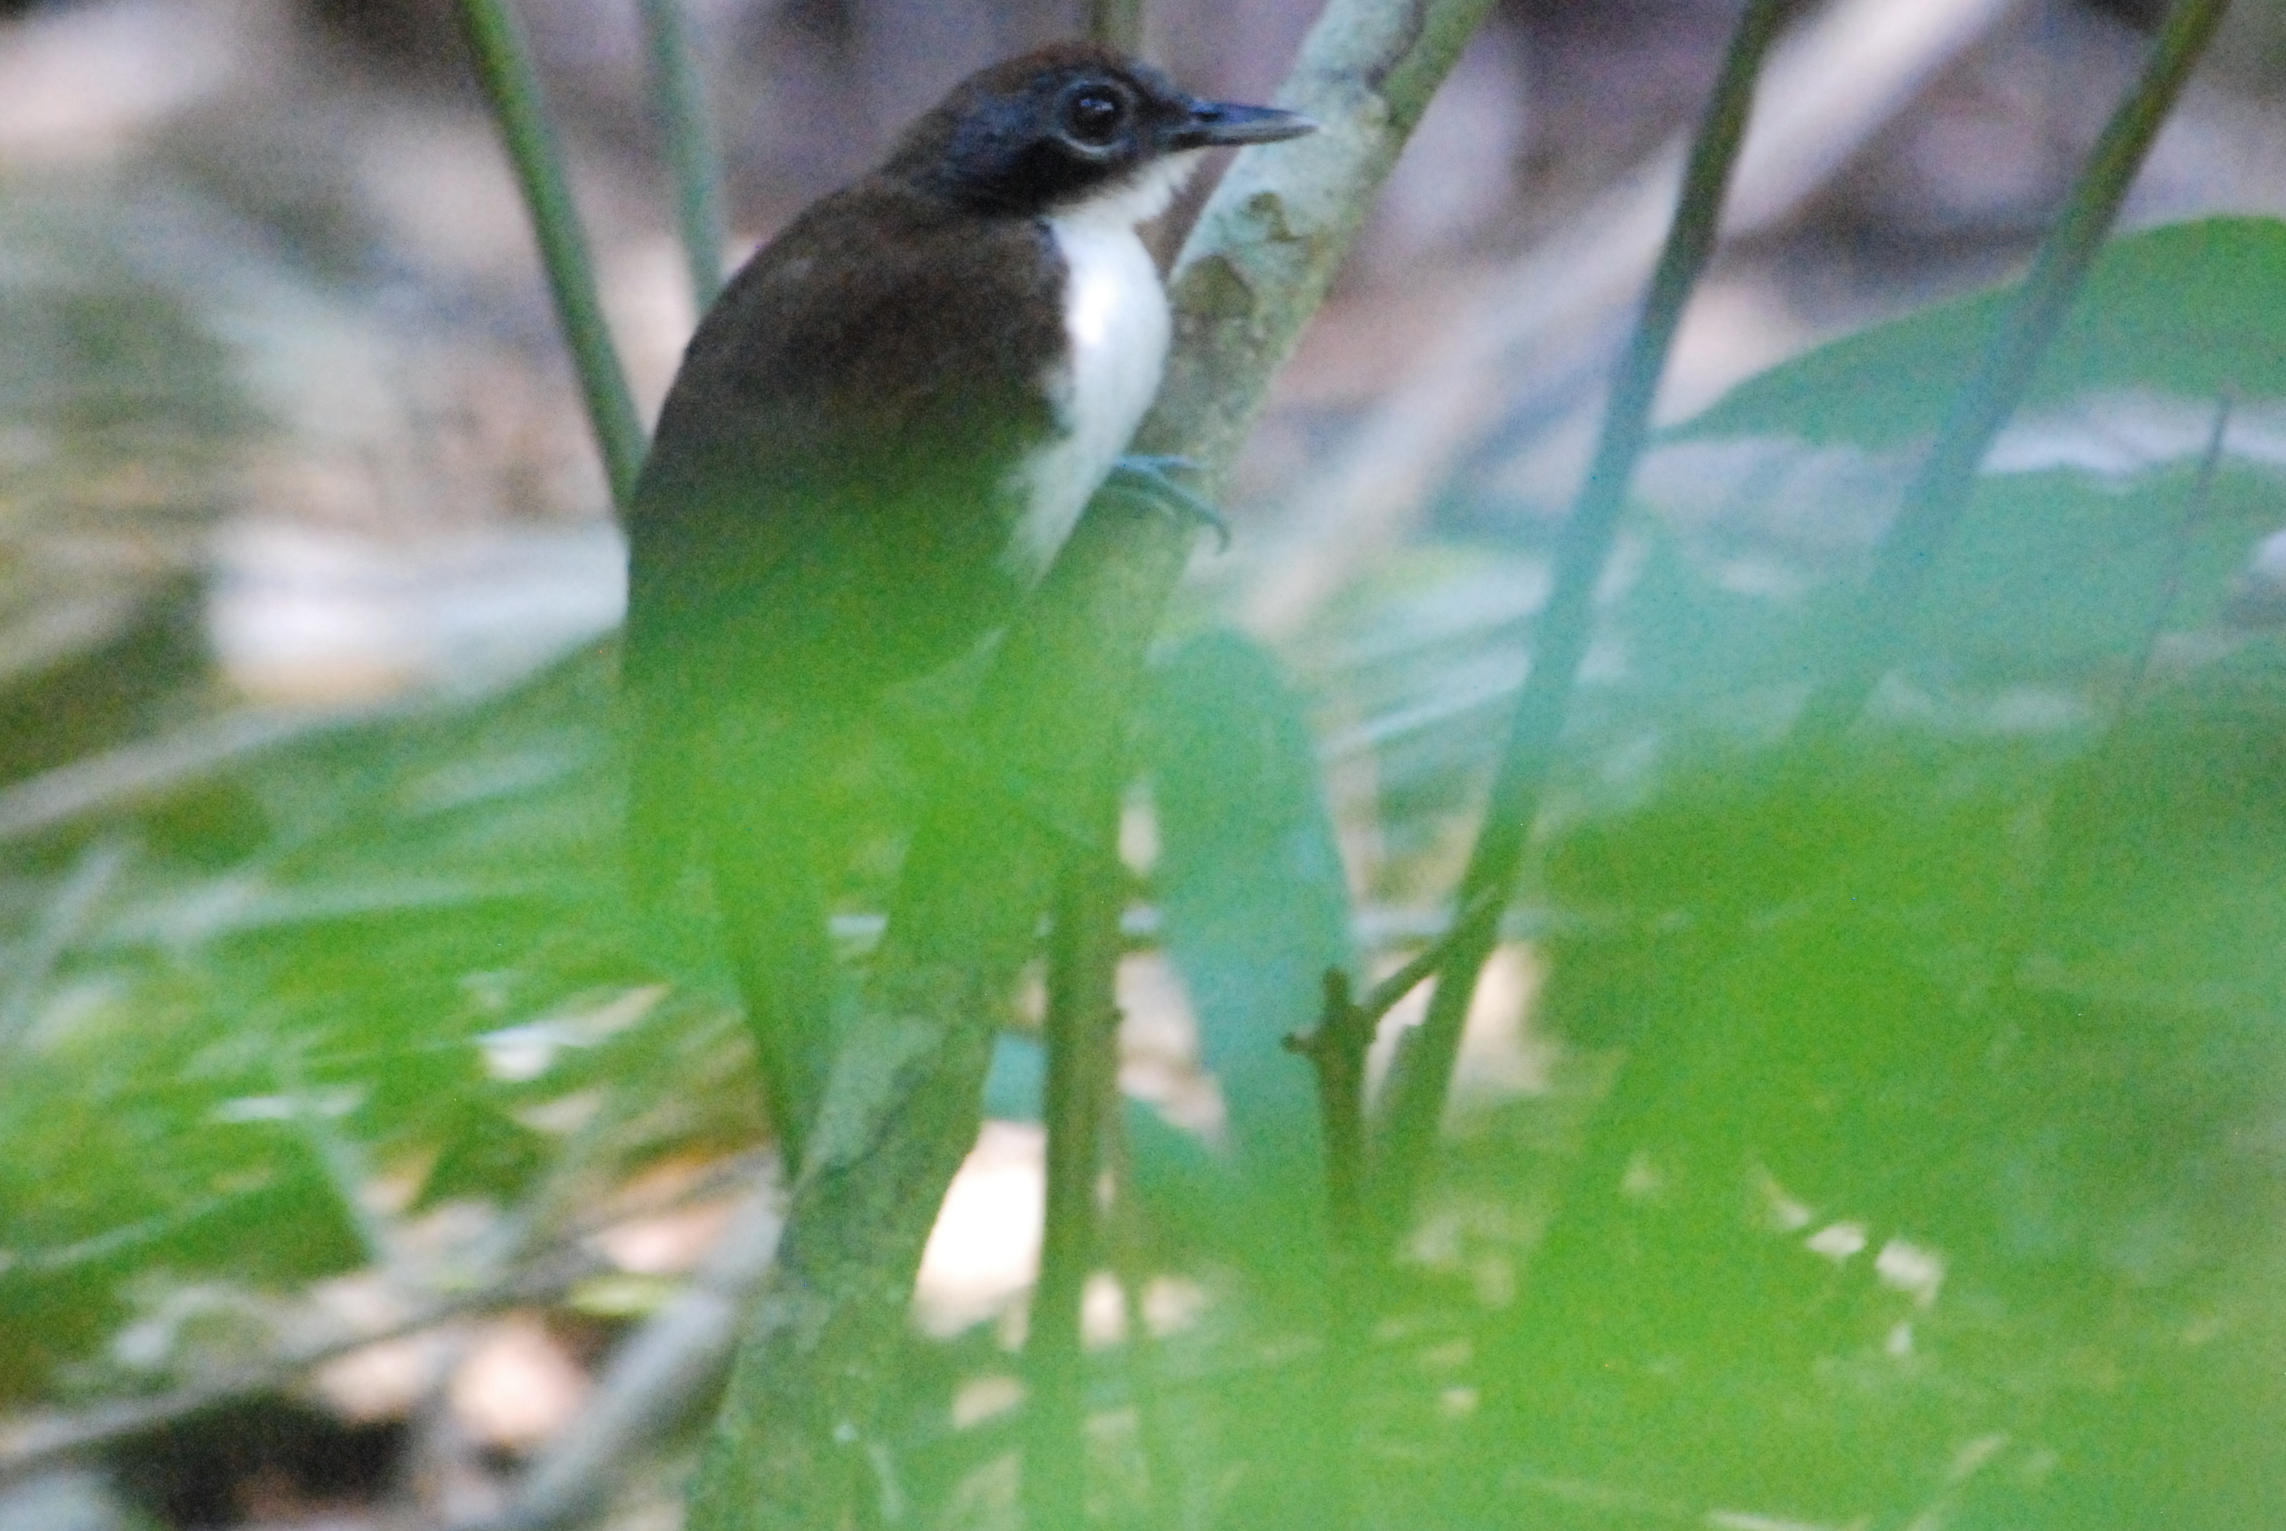 Click picture to see more Bicolored Antbirds.